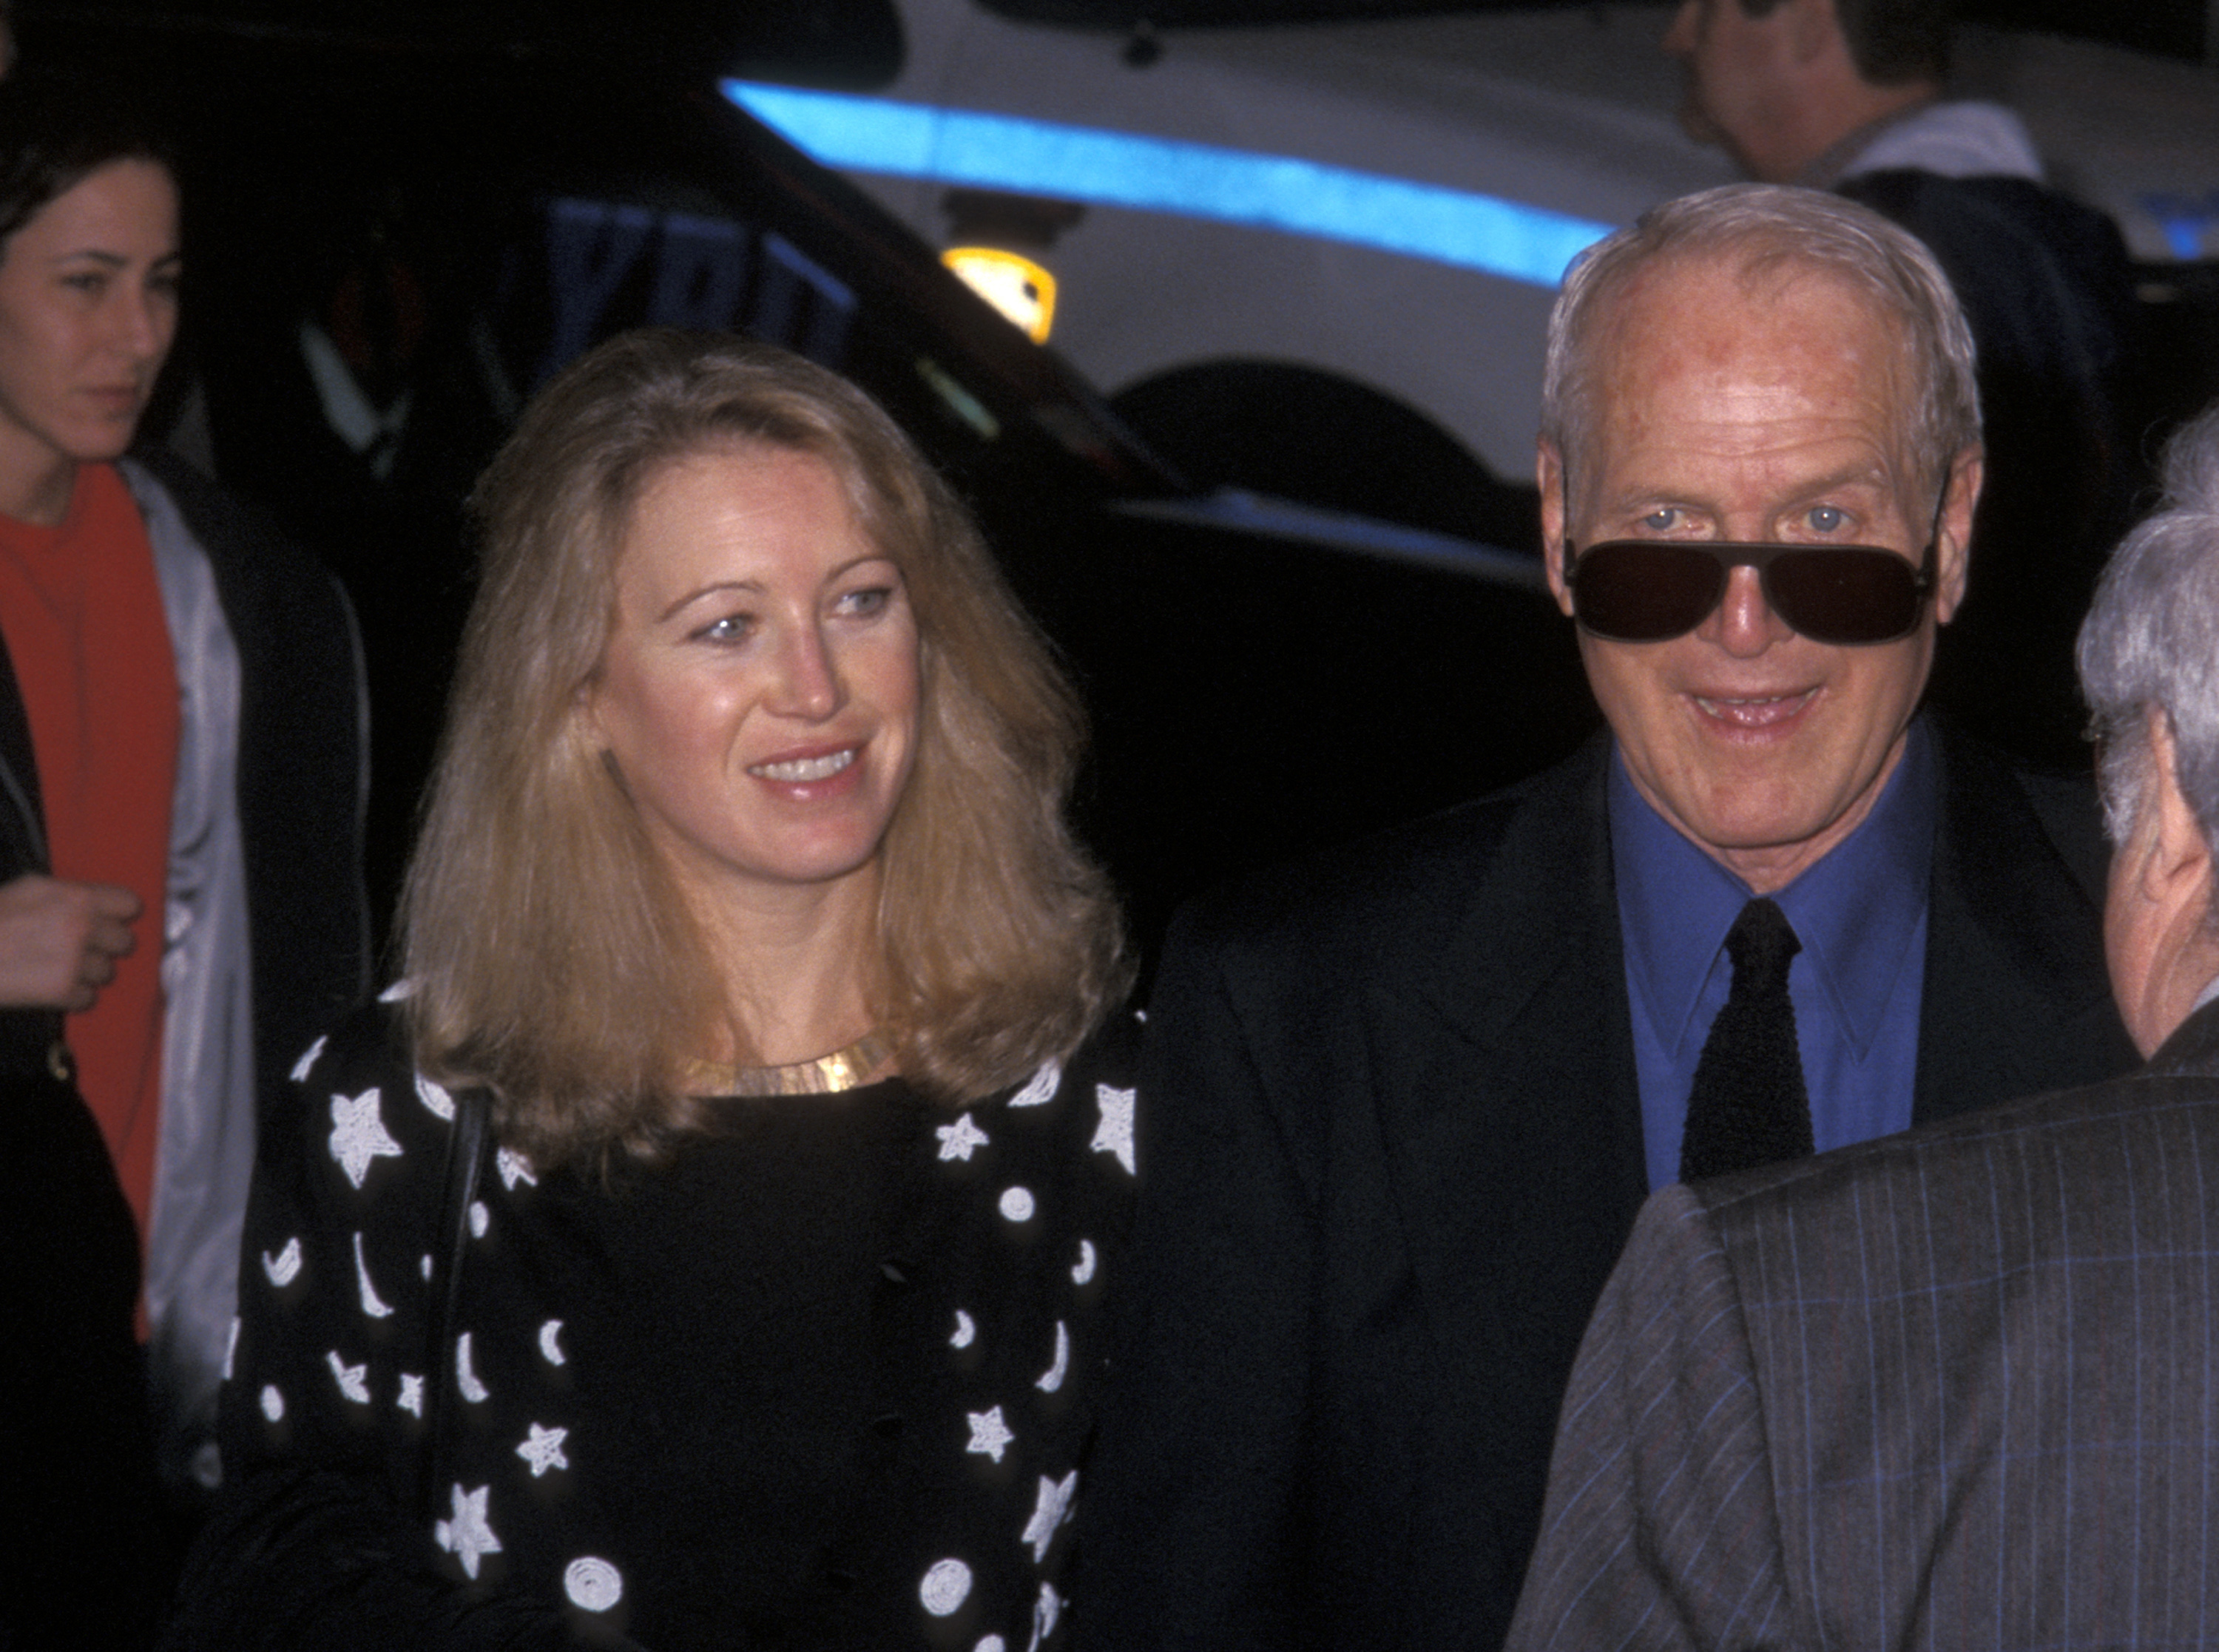 Claire Olivia and Paul Newman attend the "Where the Money Is" premiere at Loews 42nd Street E Walk in 2002 in New York City. | Source: Getty Images